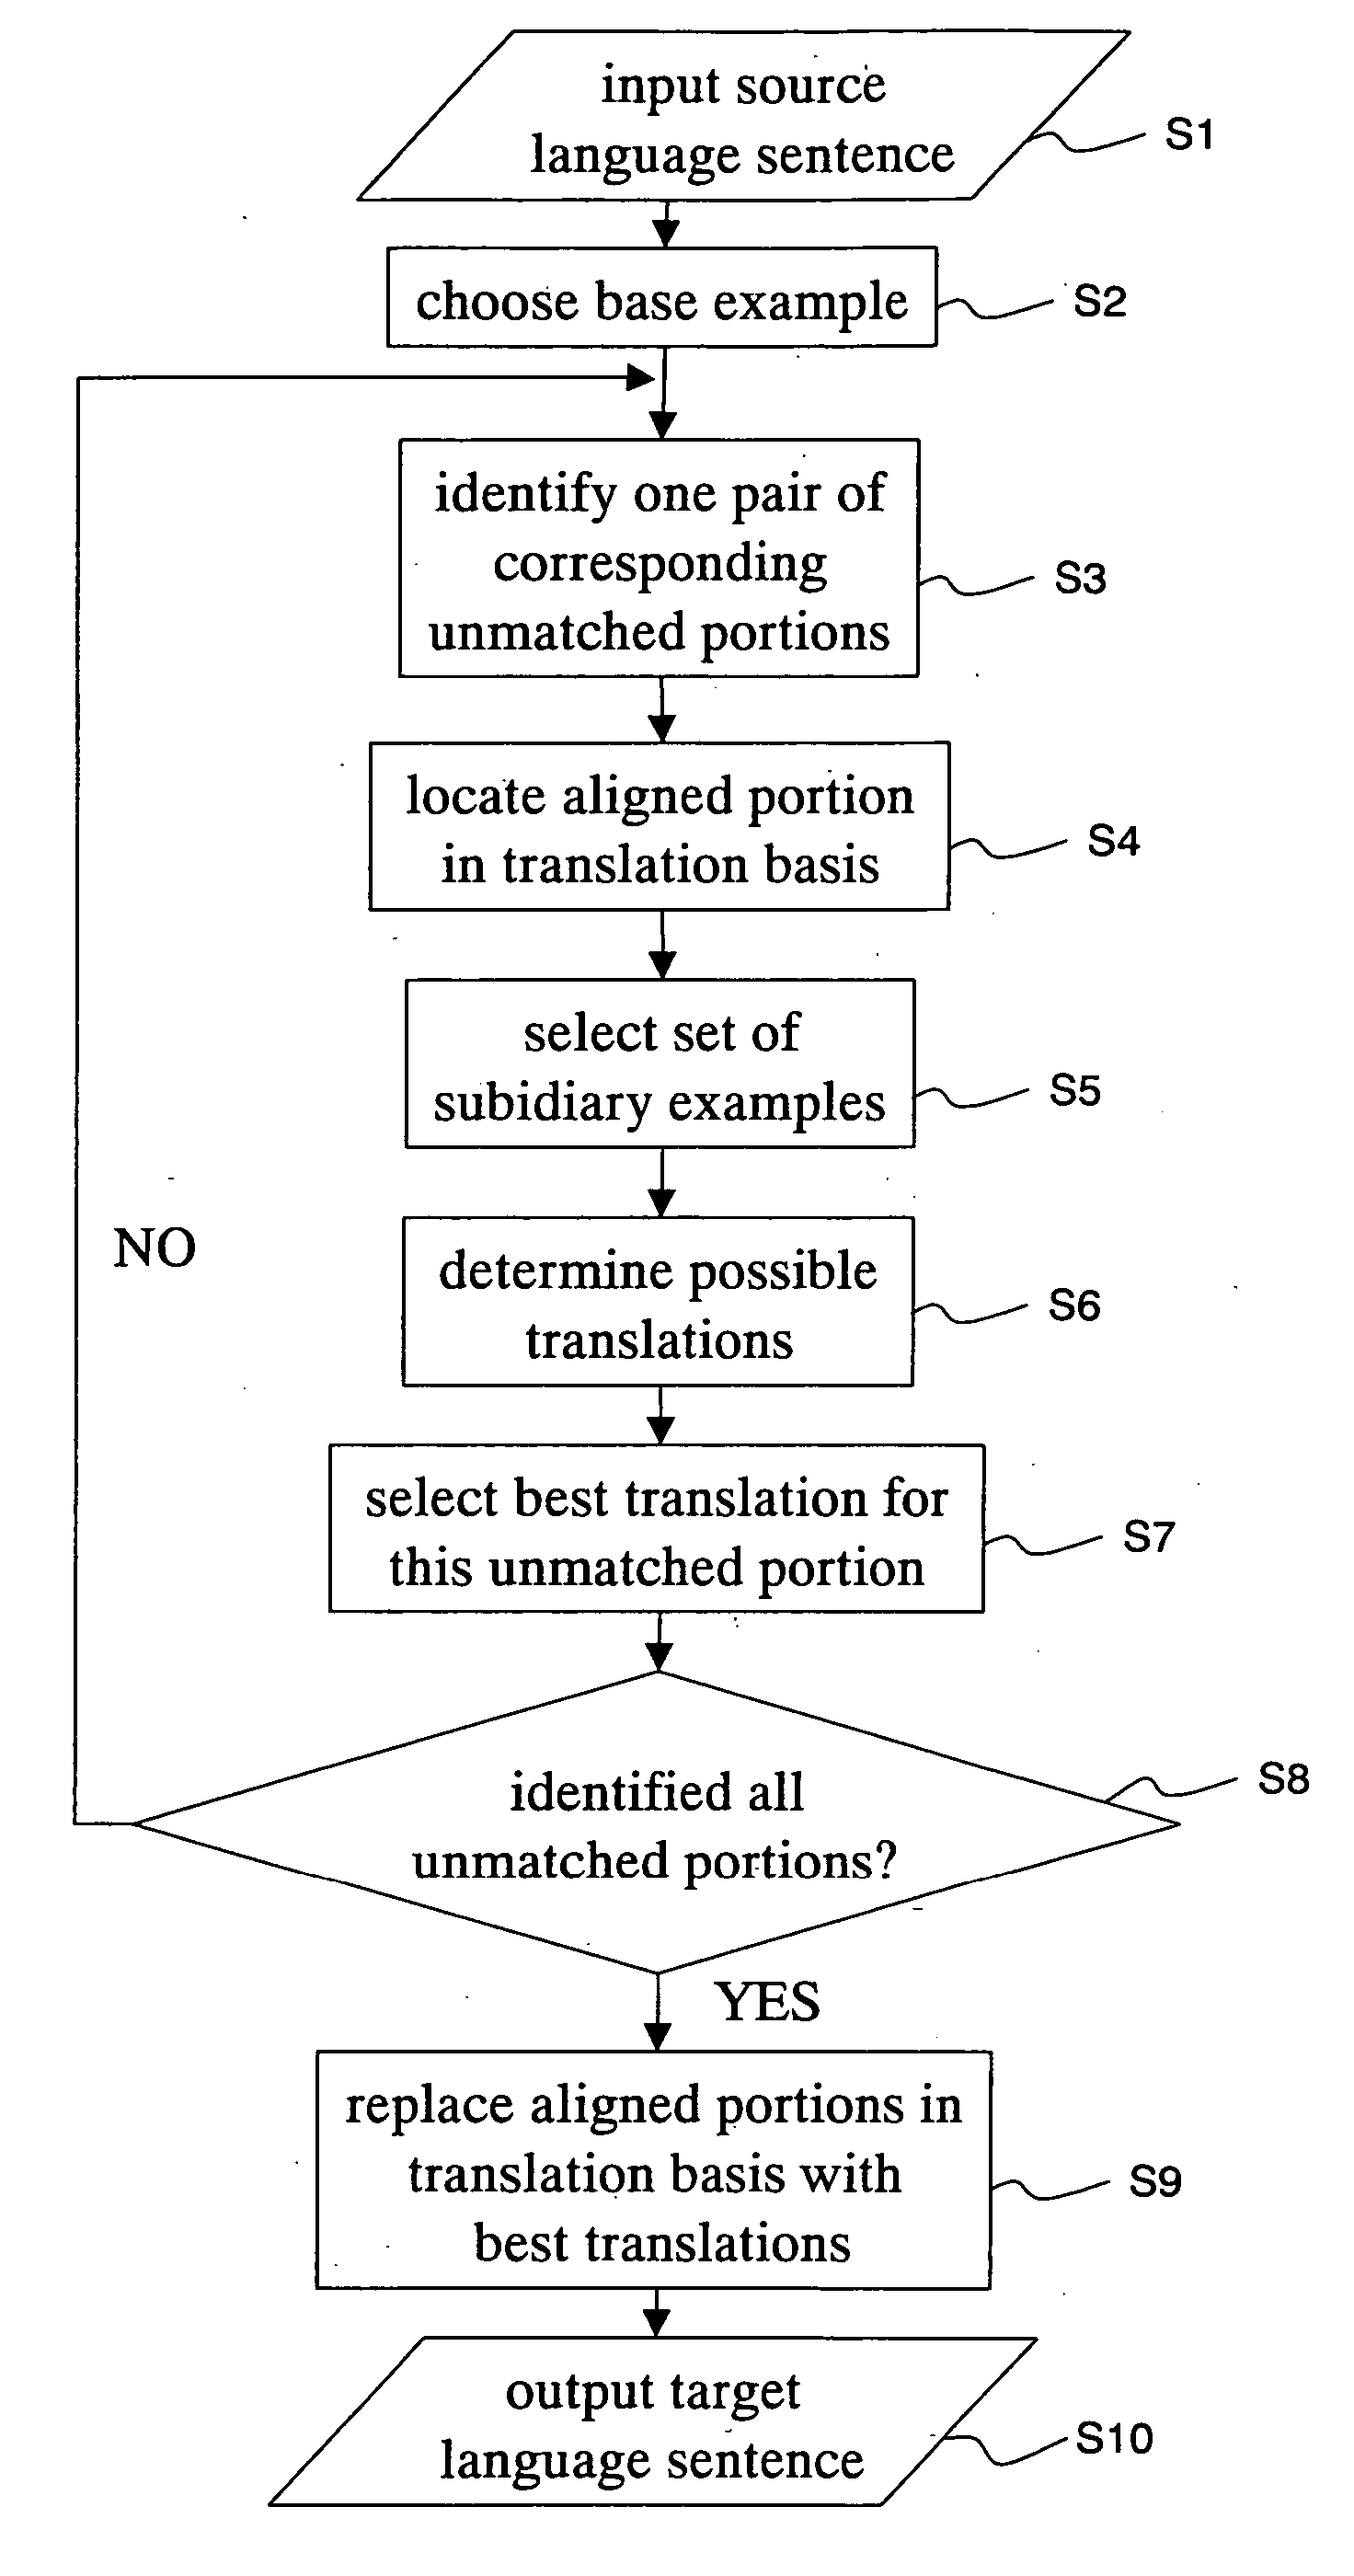 Method and apparatus for translation based on a repository of existing translations